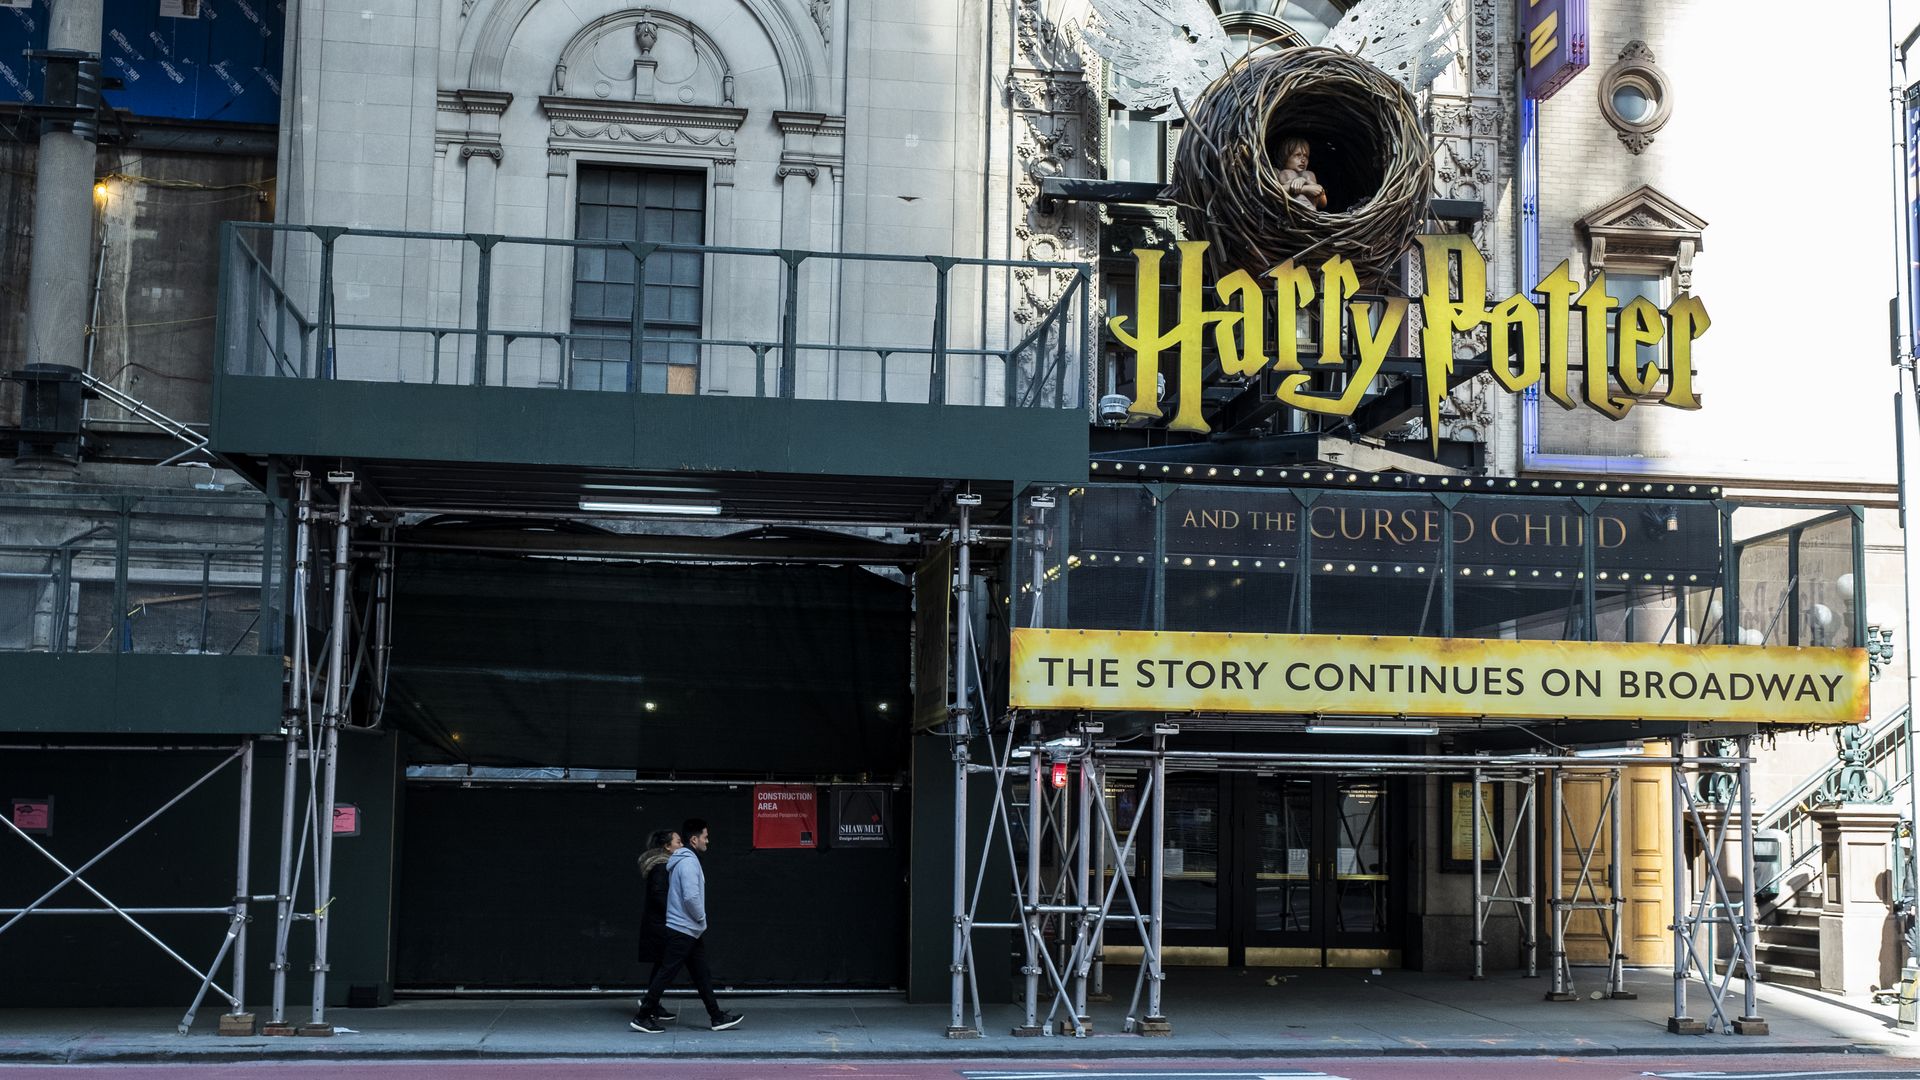  A man walks past the Lyric Theatre where Harry Potter and the Cursed Child